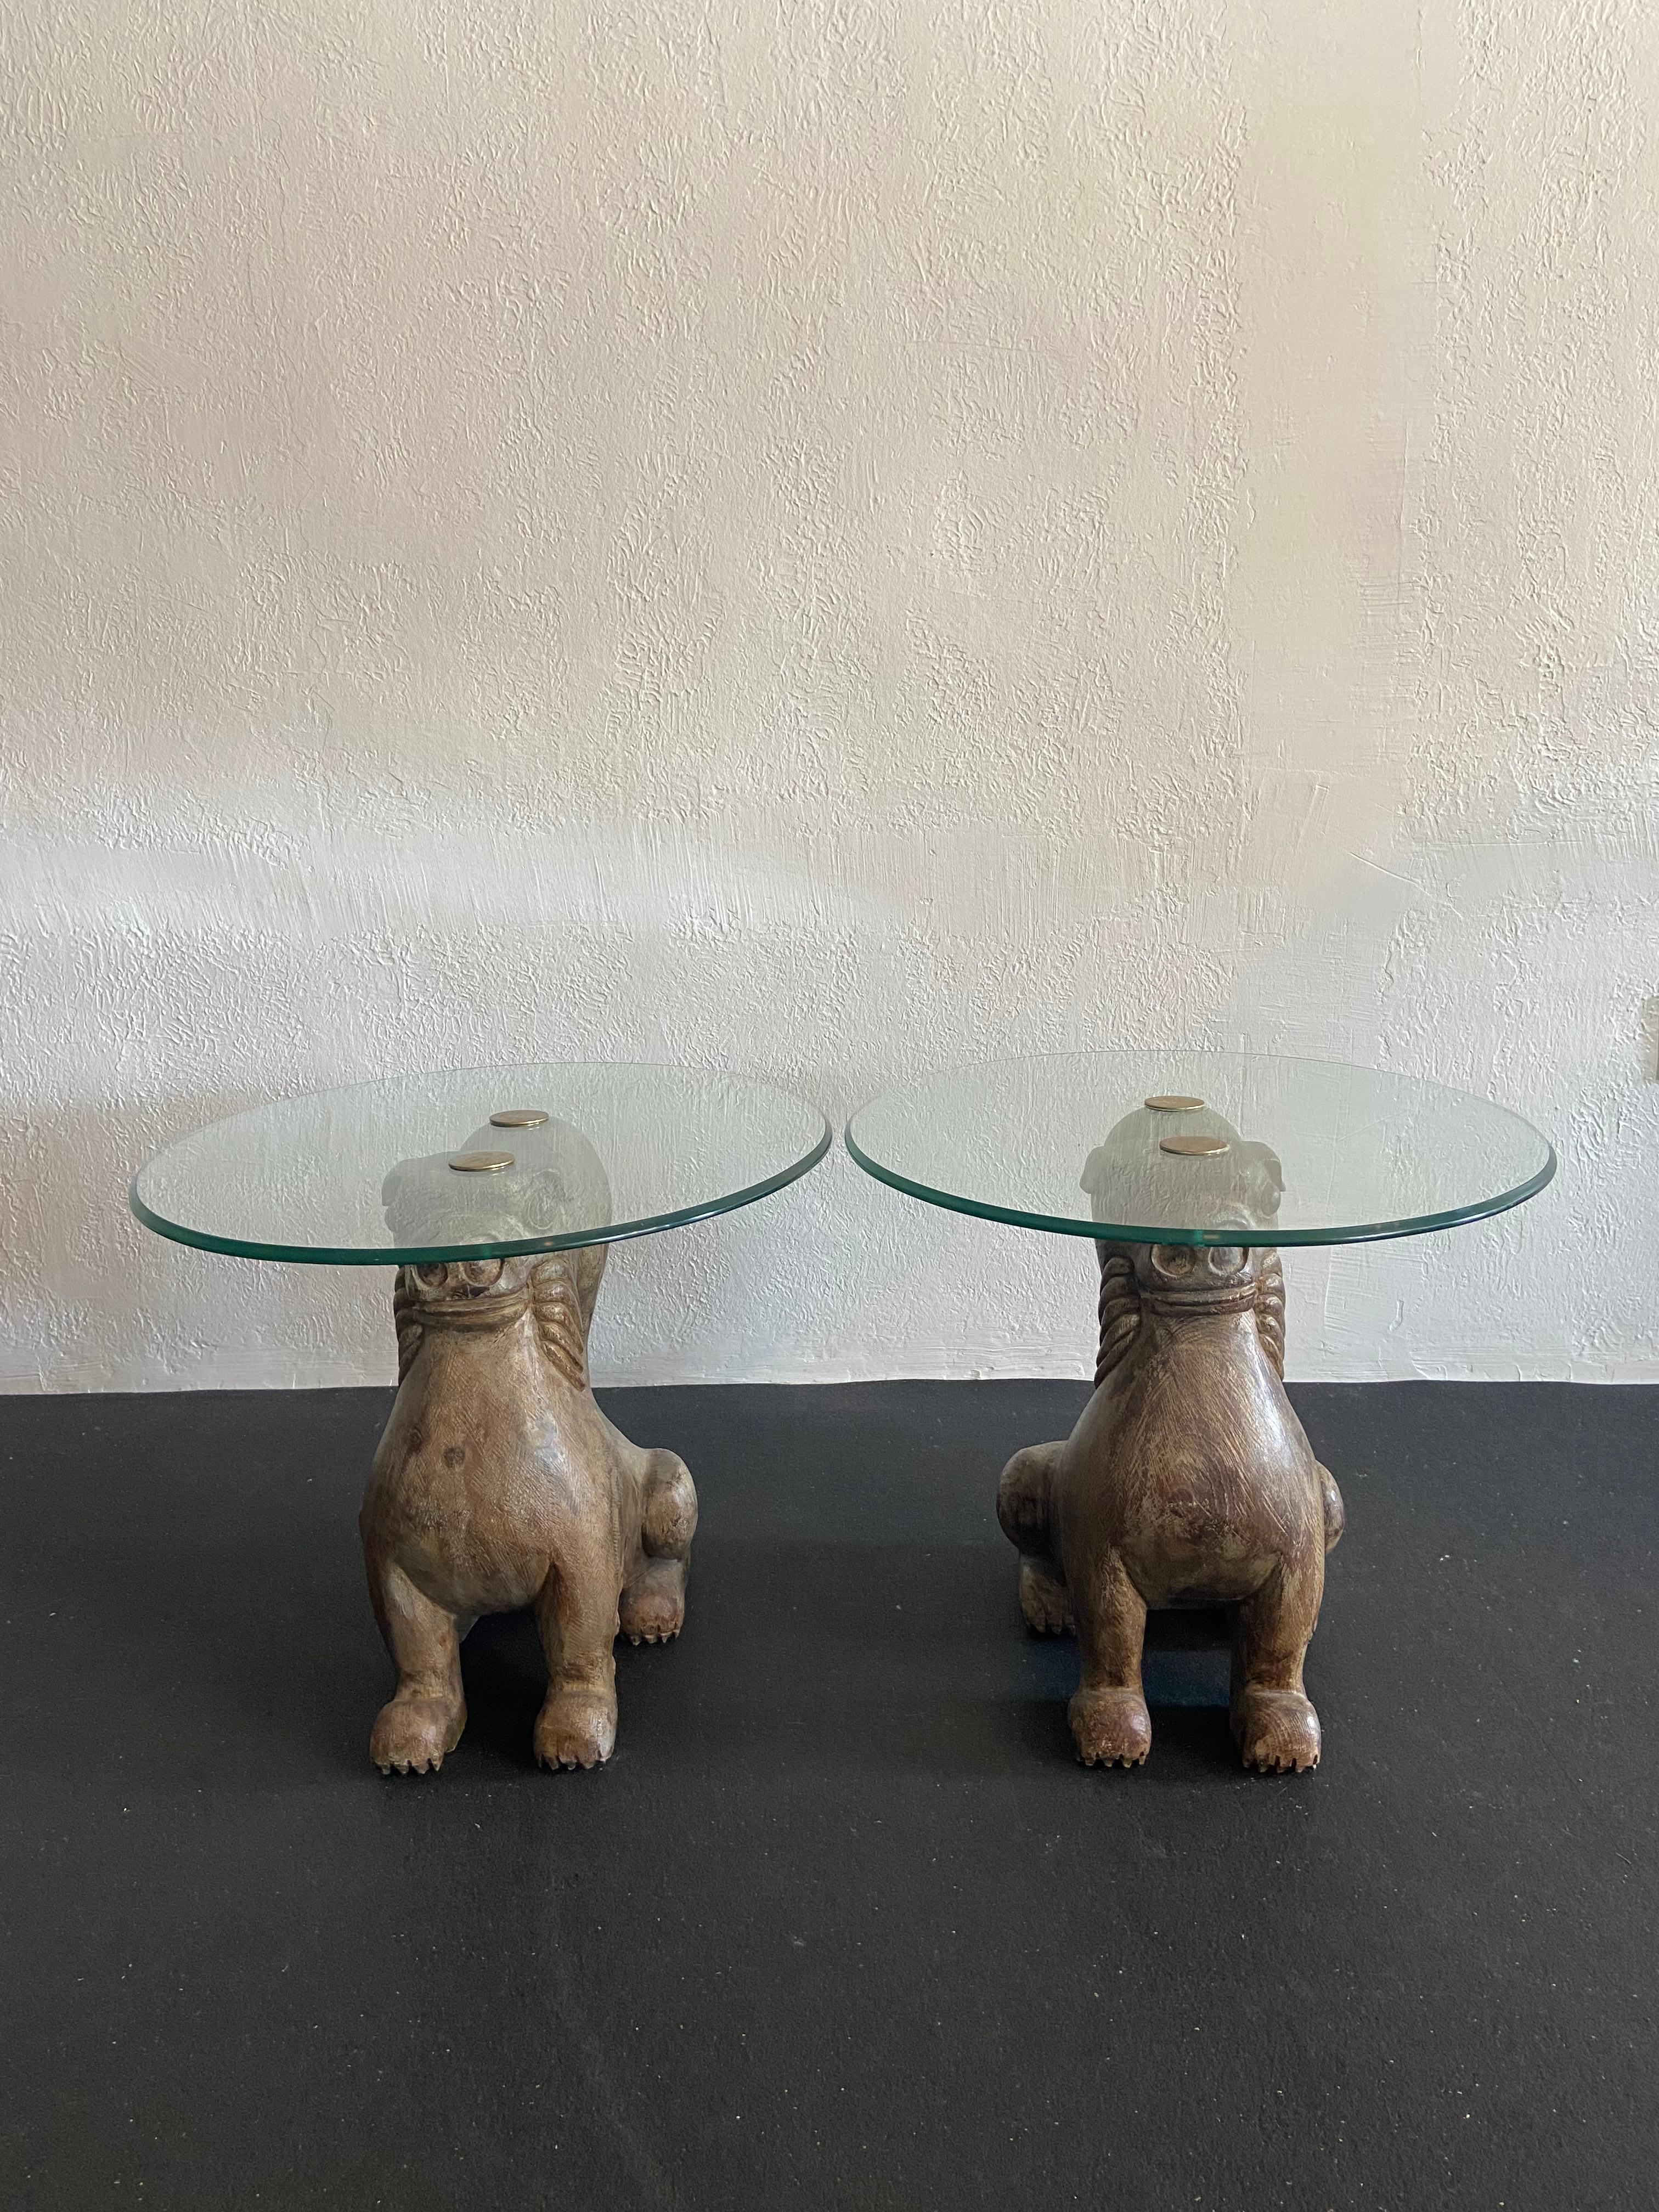 Pair of carved wood and brass foo dog end tables by Sarreid Ltd. Patina to the brass. Wear to the as found vintage glass tops. 

Would work well in a variety of interiors such as modern, mid century modern, Hollywood regency, etc. Piece blends